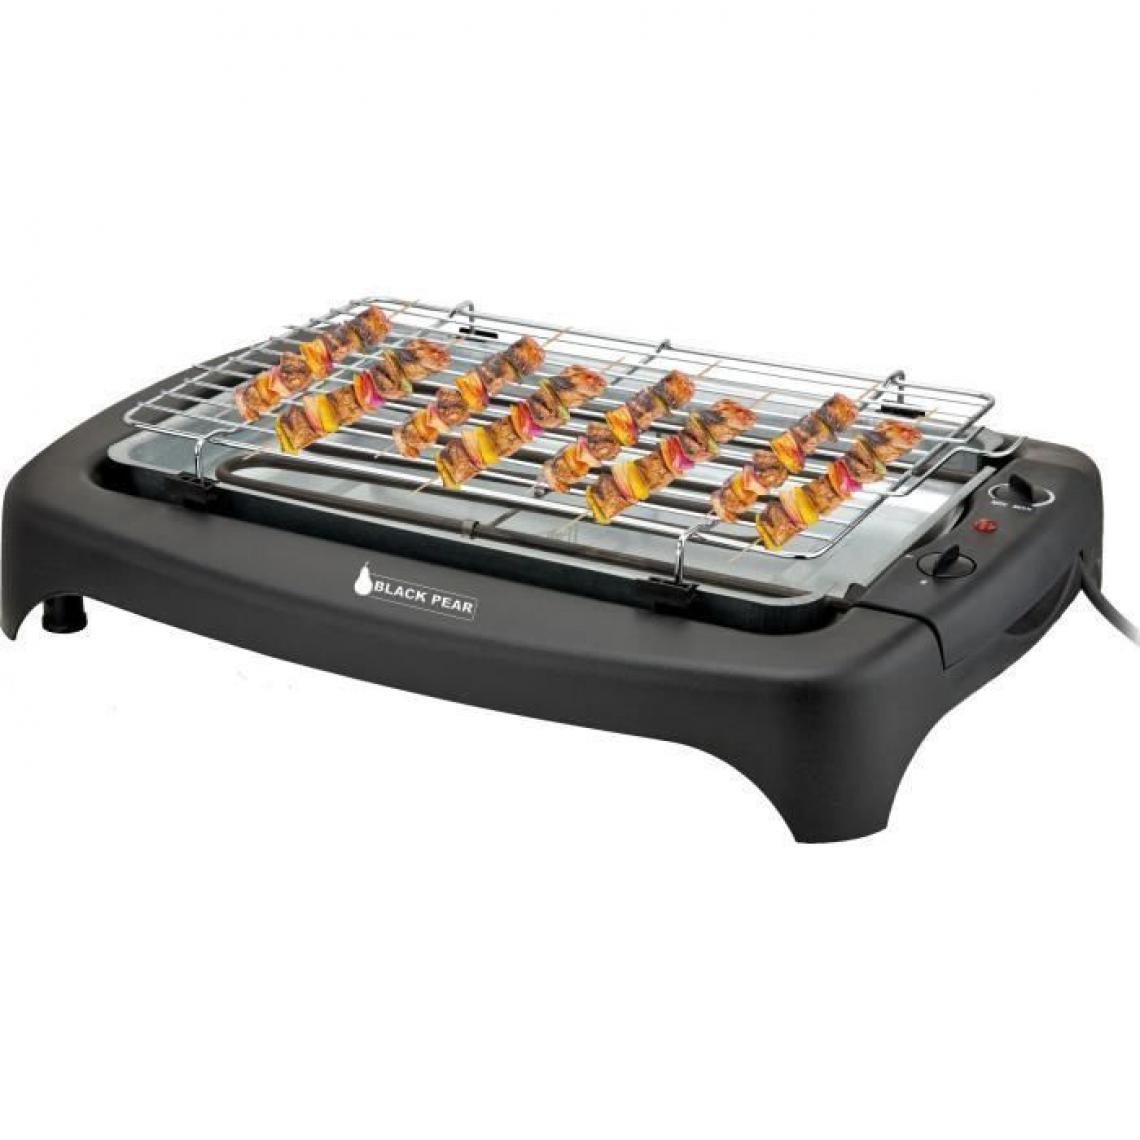 Black Pear - BLACKPEAR BBQ 2200 Barbecue de table - 2000 W - Barbecues électriques